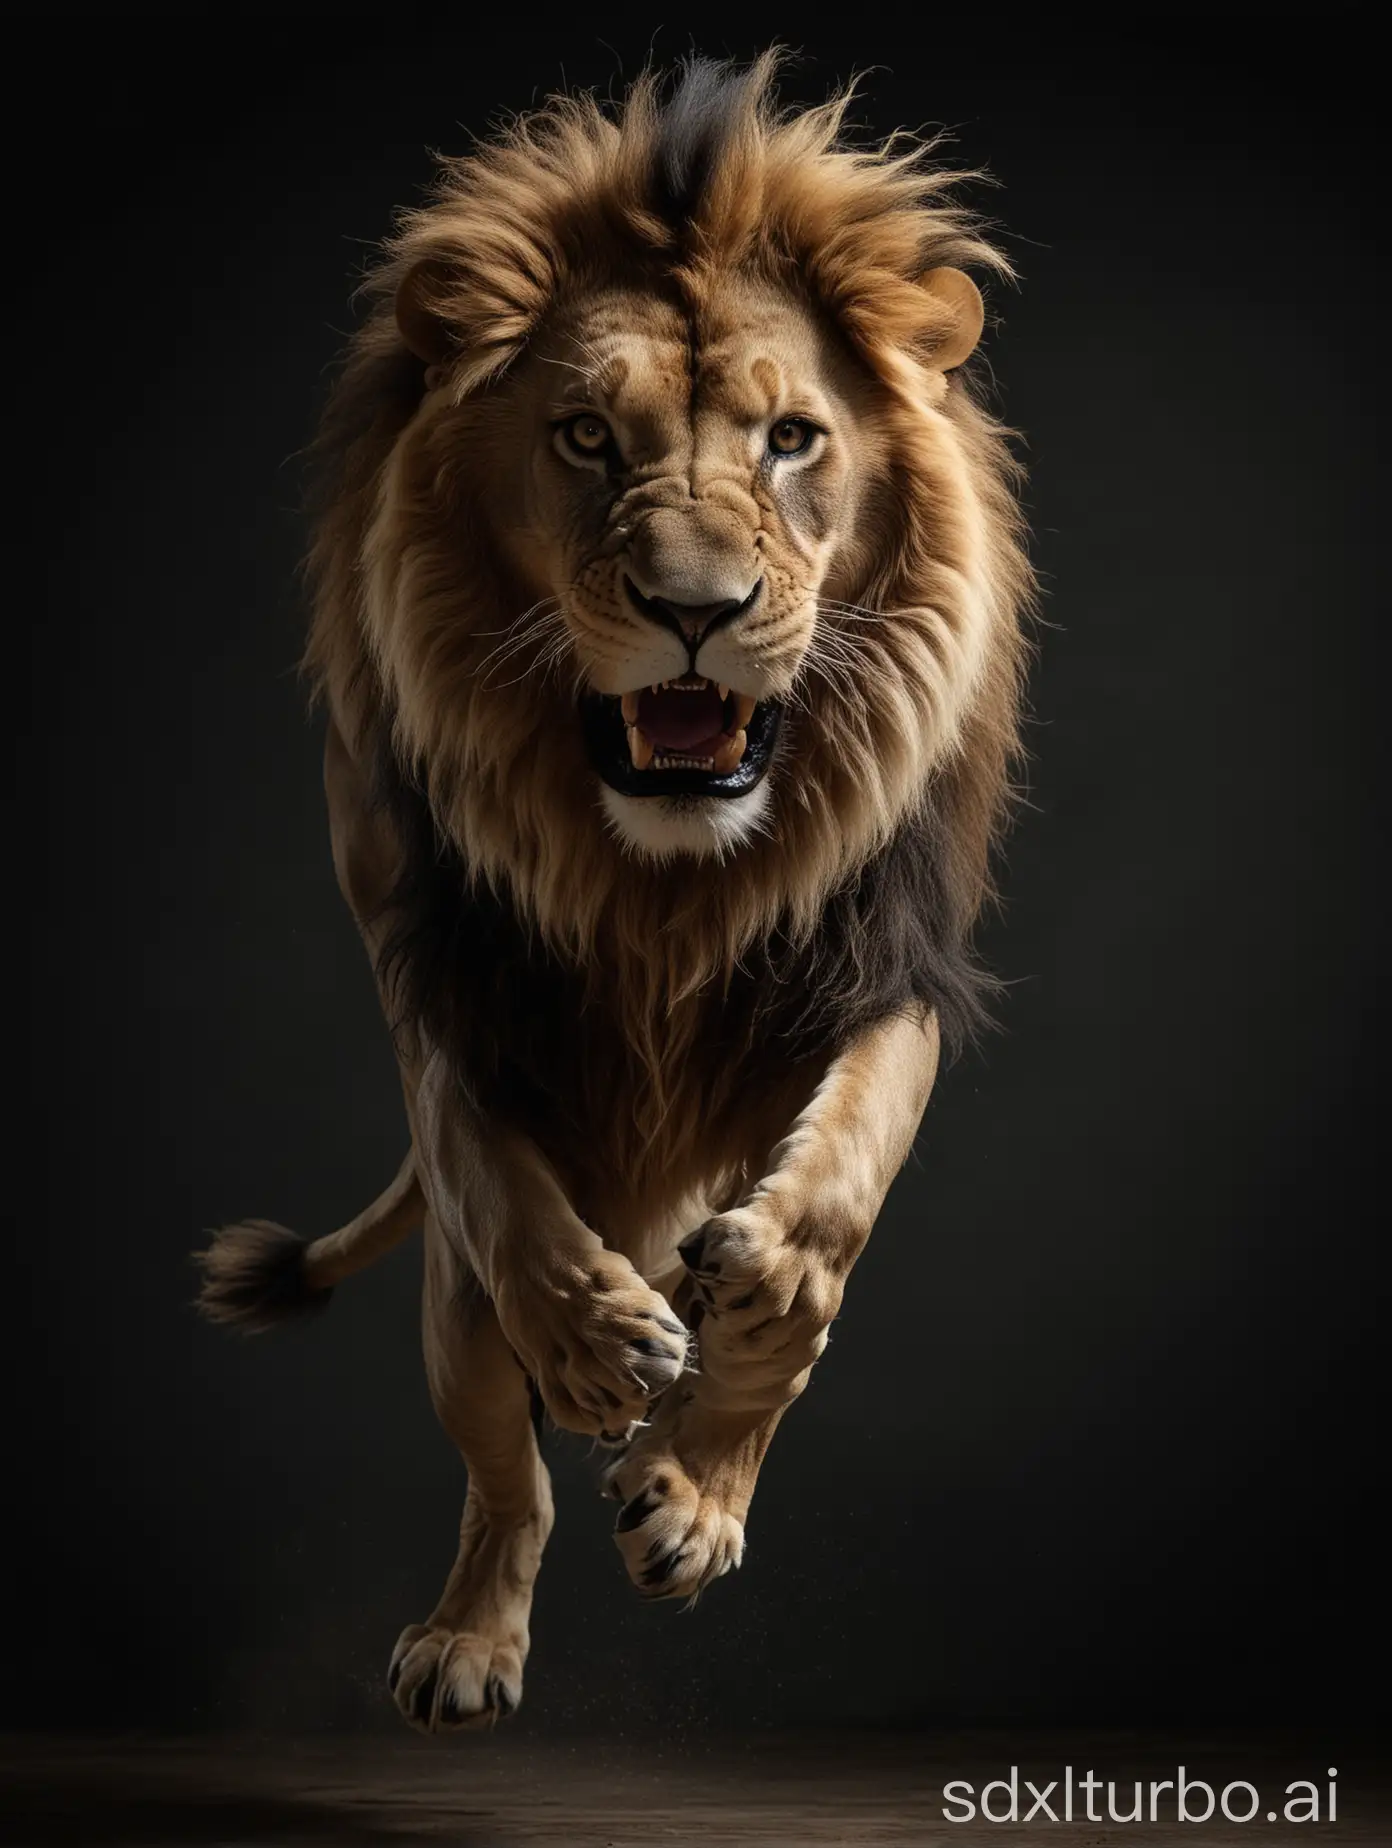 Majestic-Lion-Jumping-Directly-at-Camera-in-Studio-Portrait